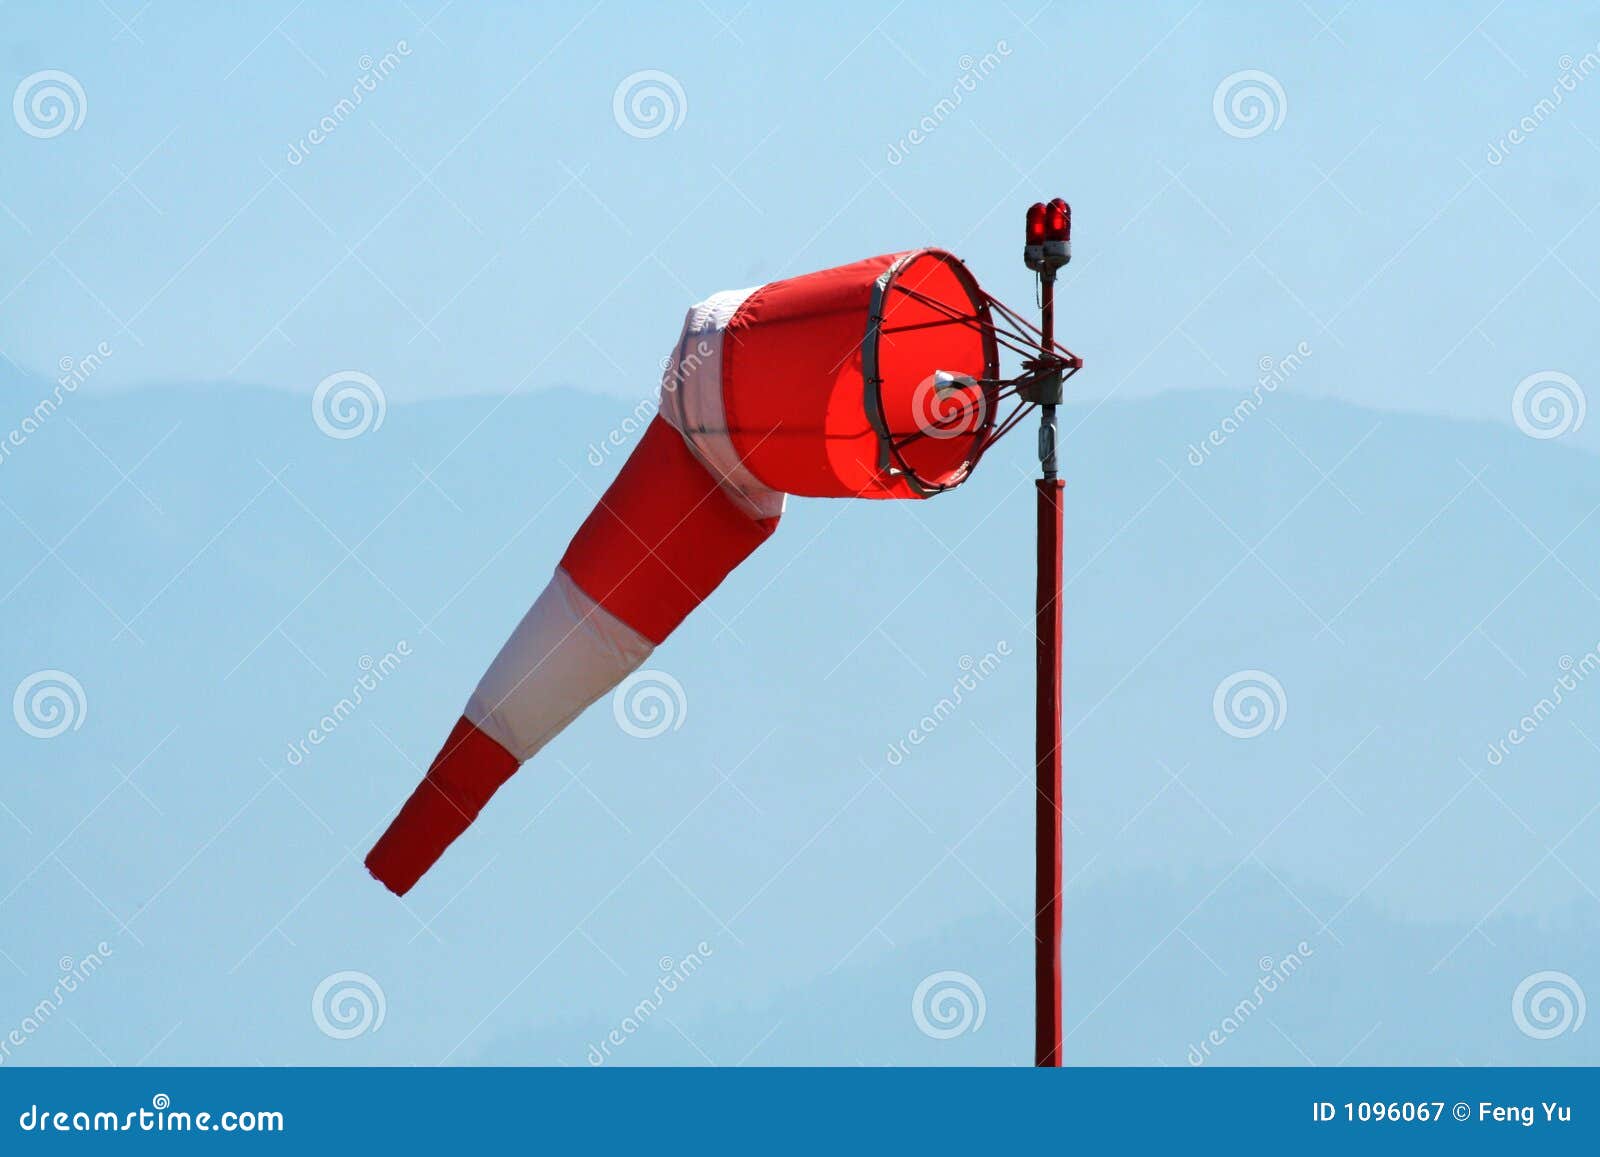 windsock at airport